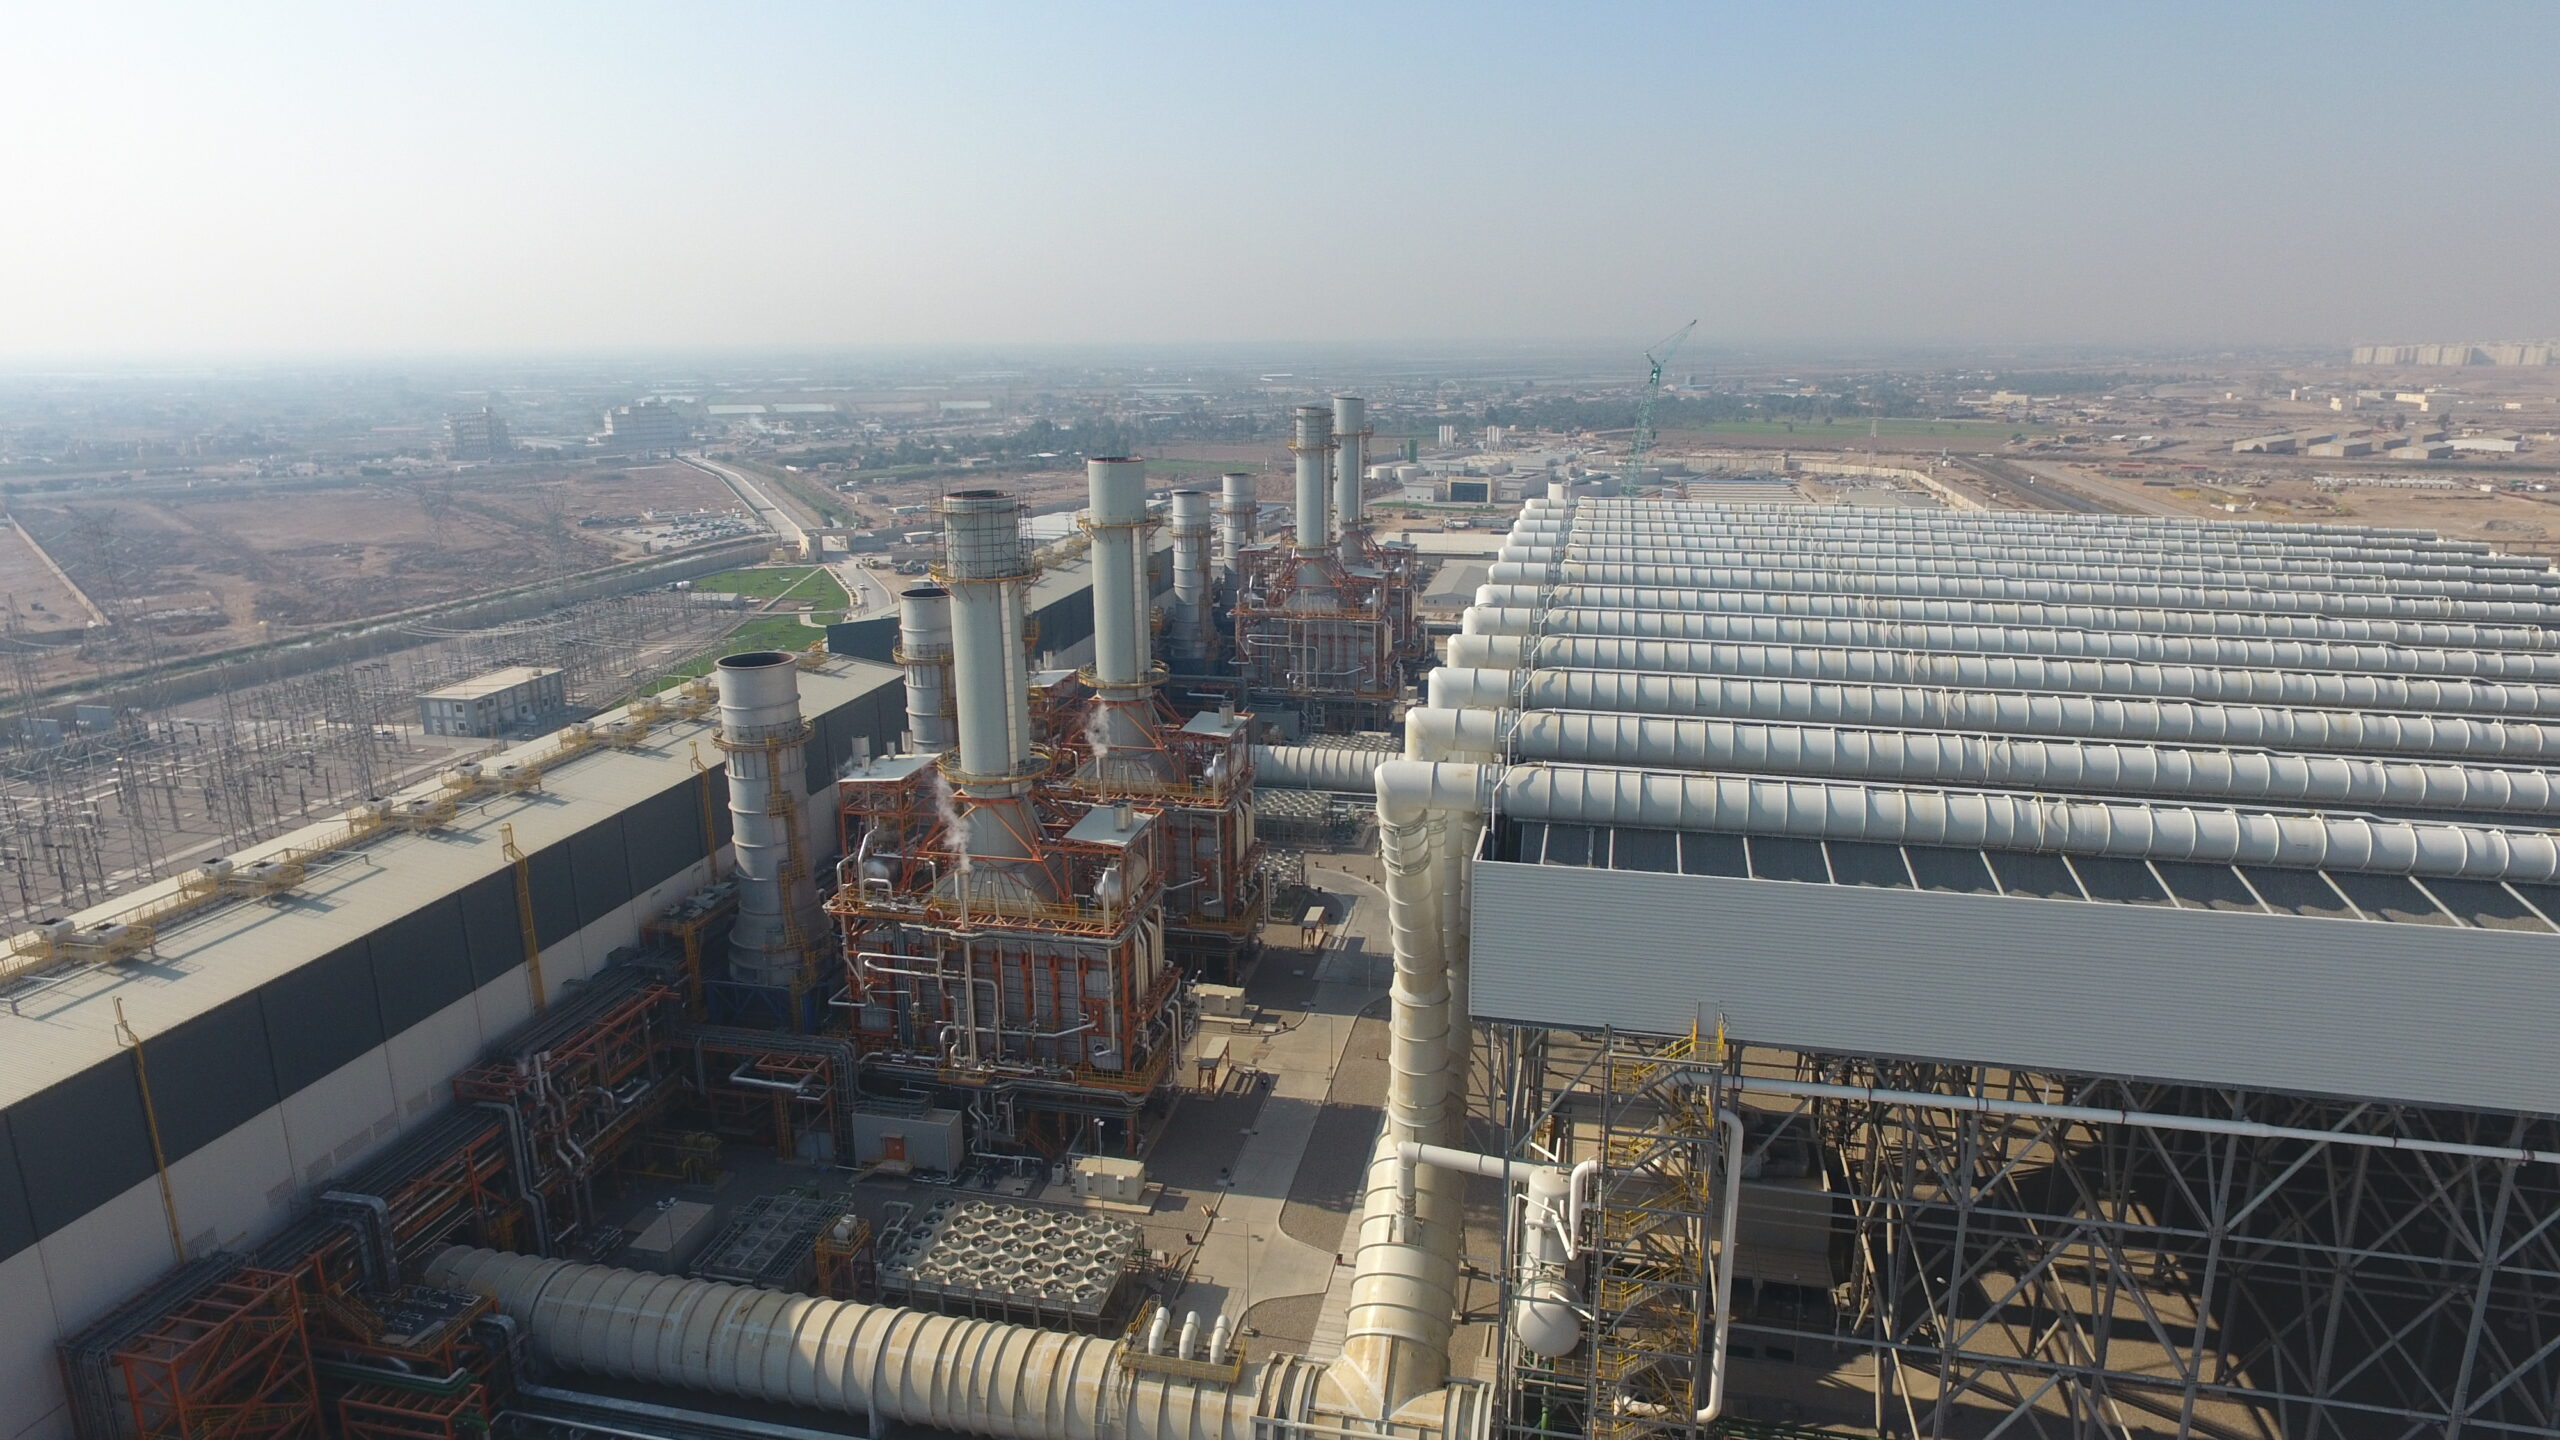 AVAX Group signed a contract worth €673.5 million  for a 1,750MW power station in Romania